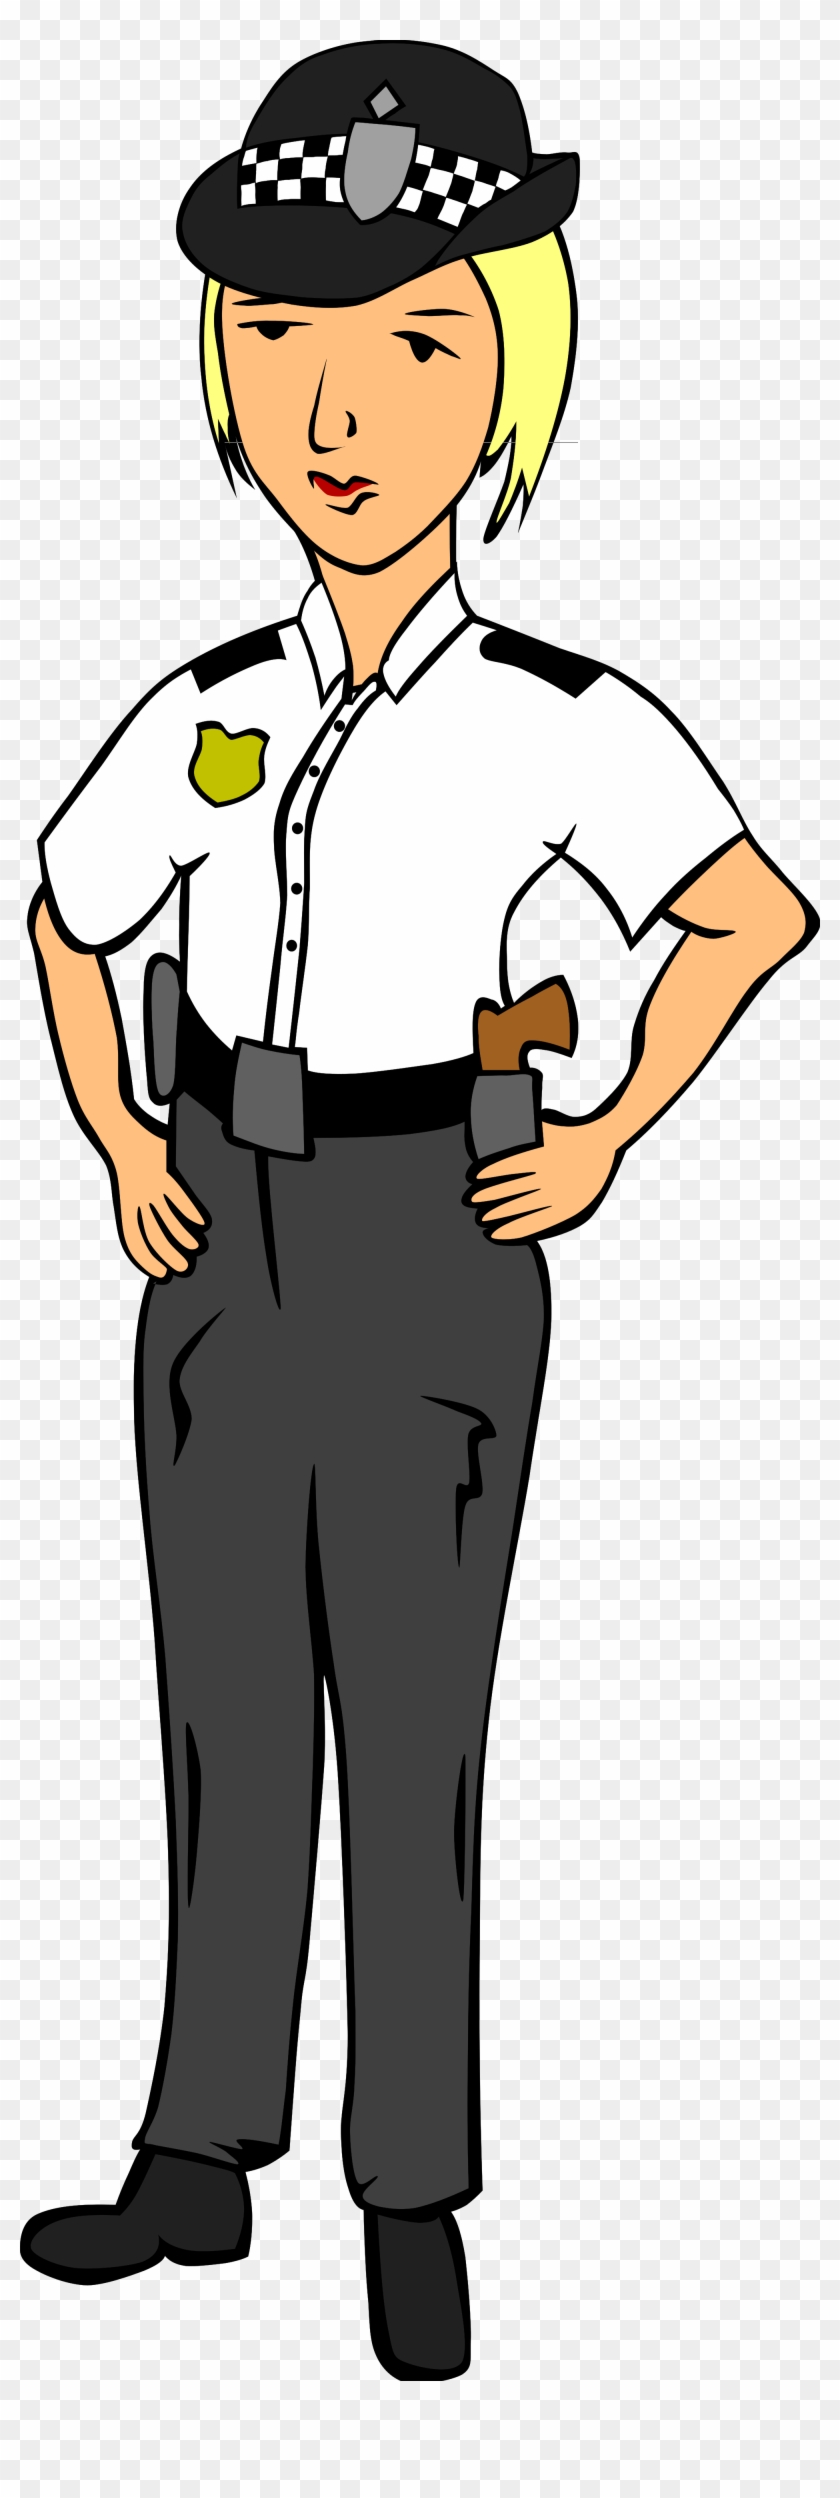 Police Officer Clipart - British Police Clipart #141420